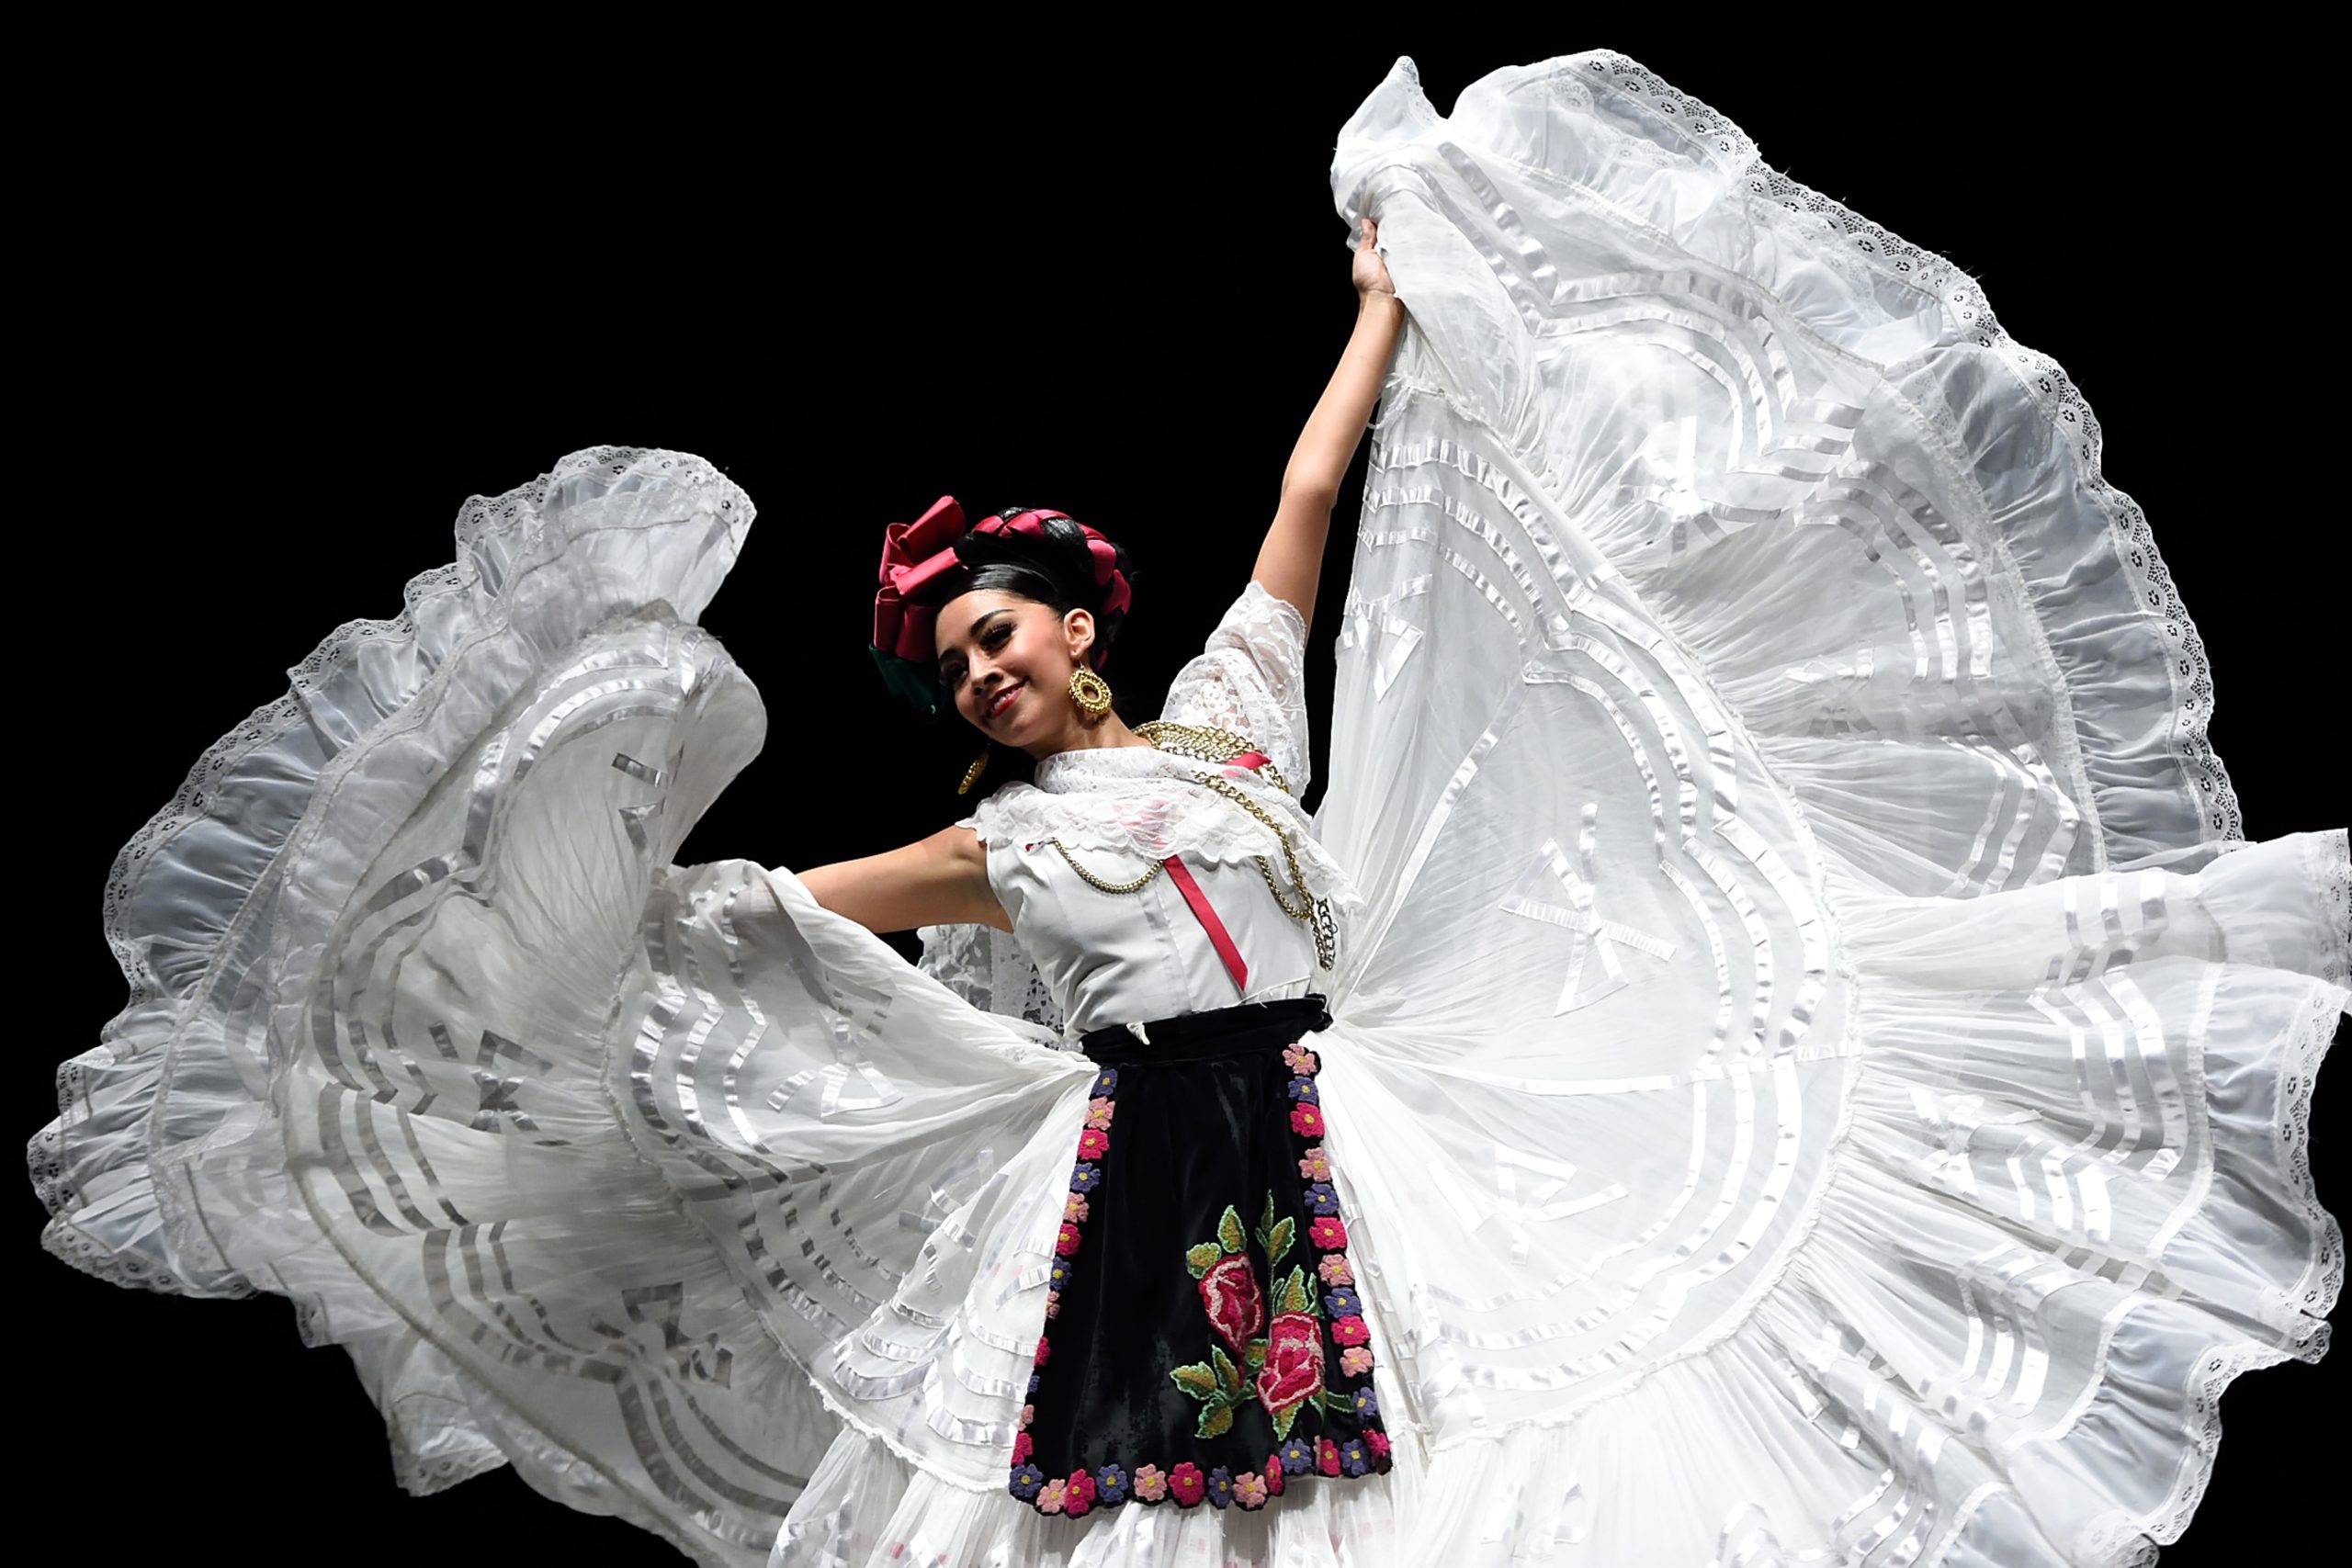 Ballet Folklorico dancer performs on stage in traditional Mexican attire, gracefully holding up a flowing white dress adorned with intricate embroidery.